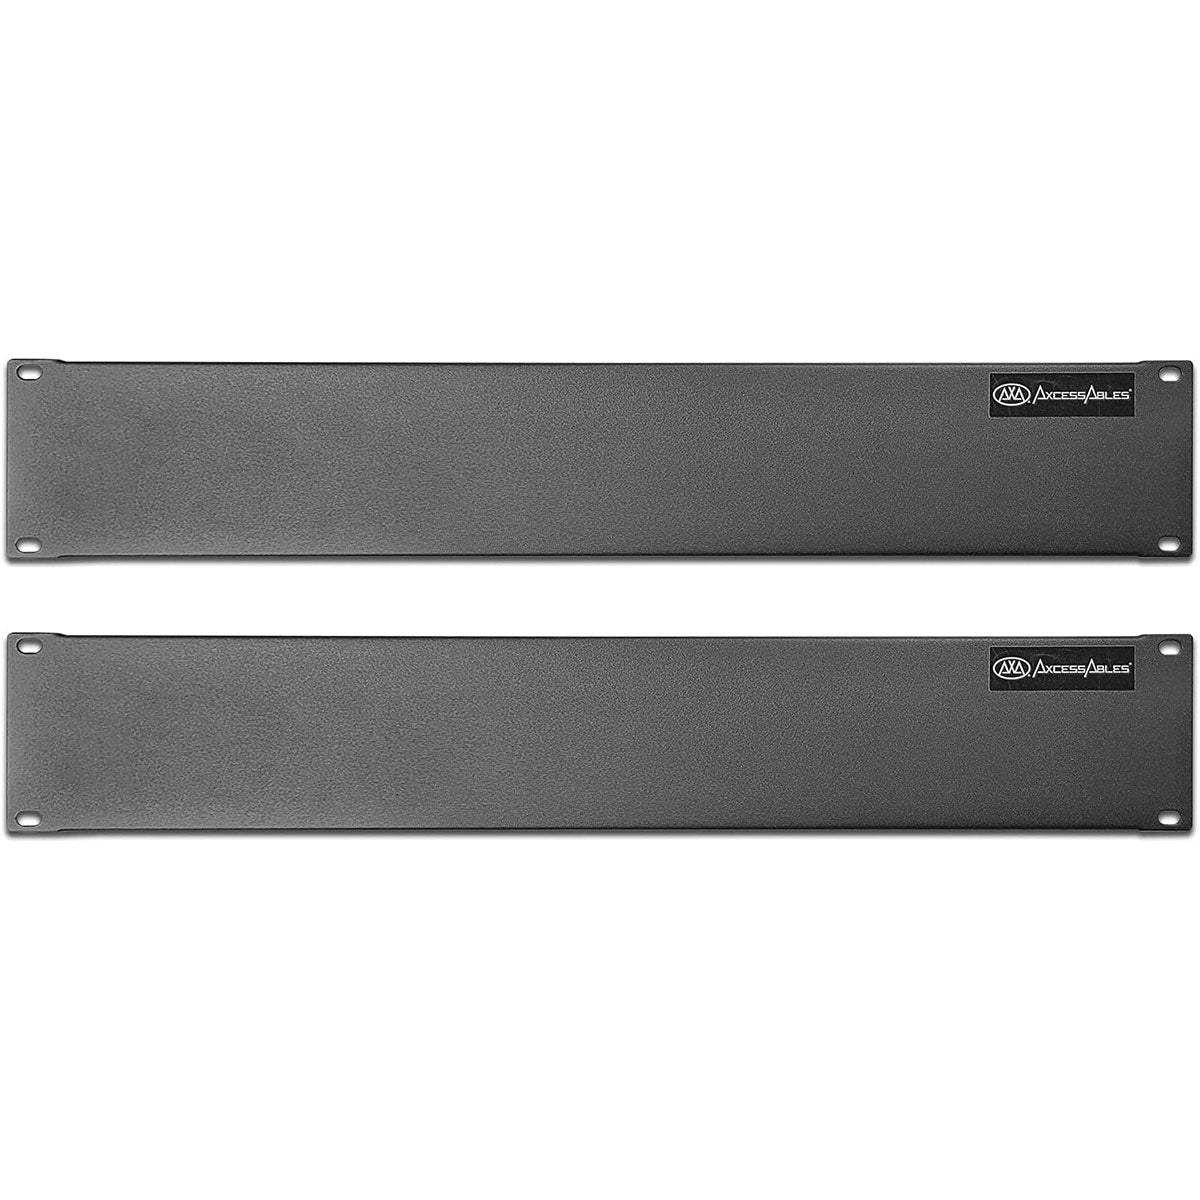 AxcessAbles RKBLANK2U A/V Rack Two Space Blank Plate (Pair)